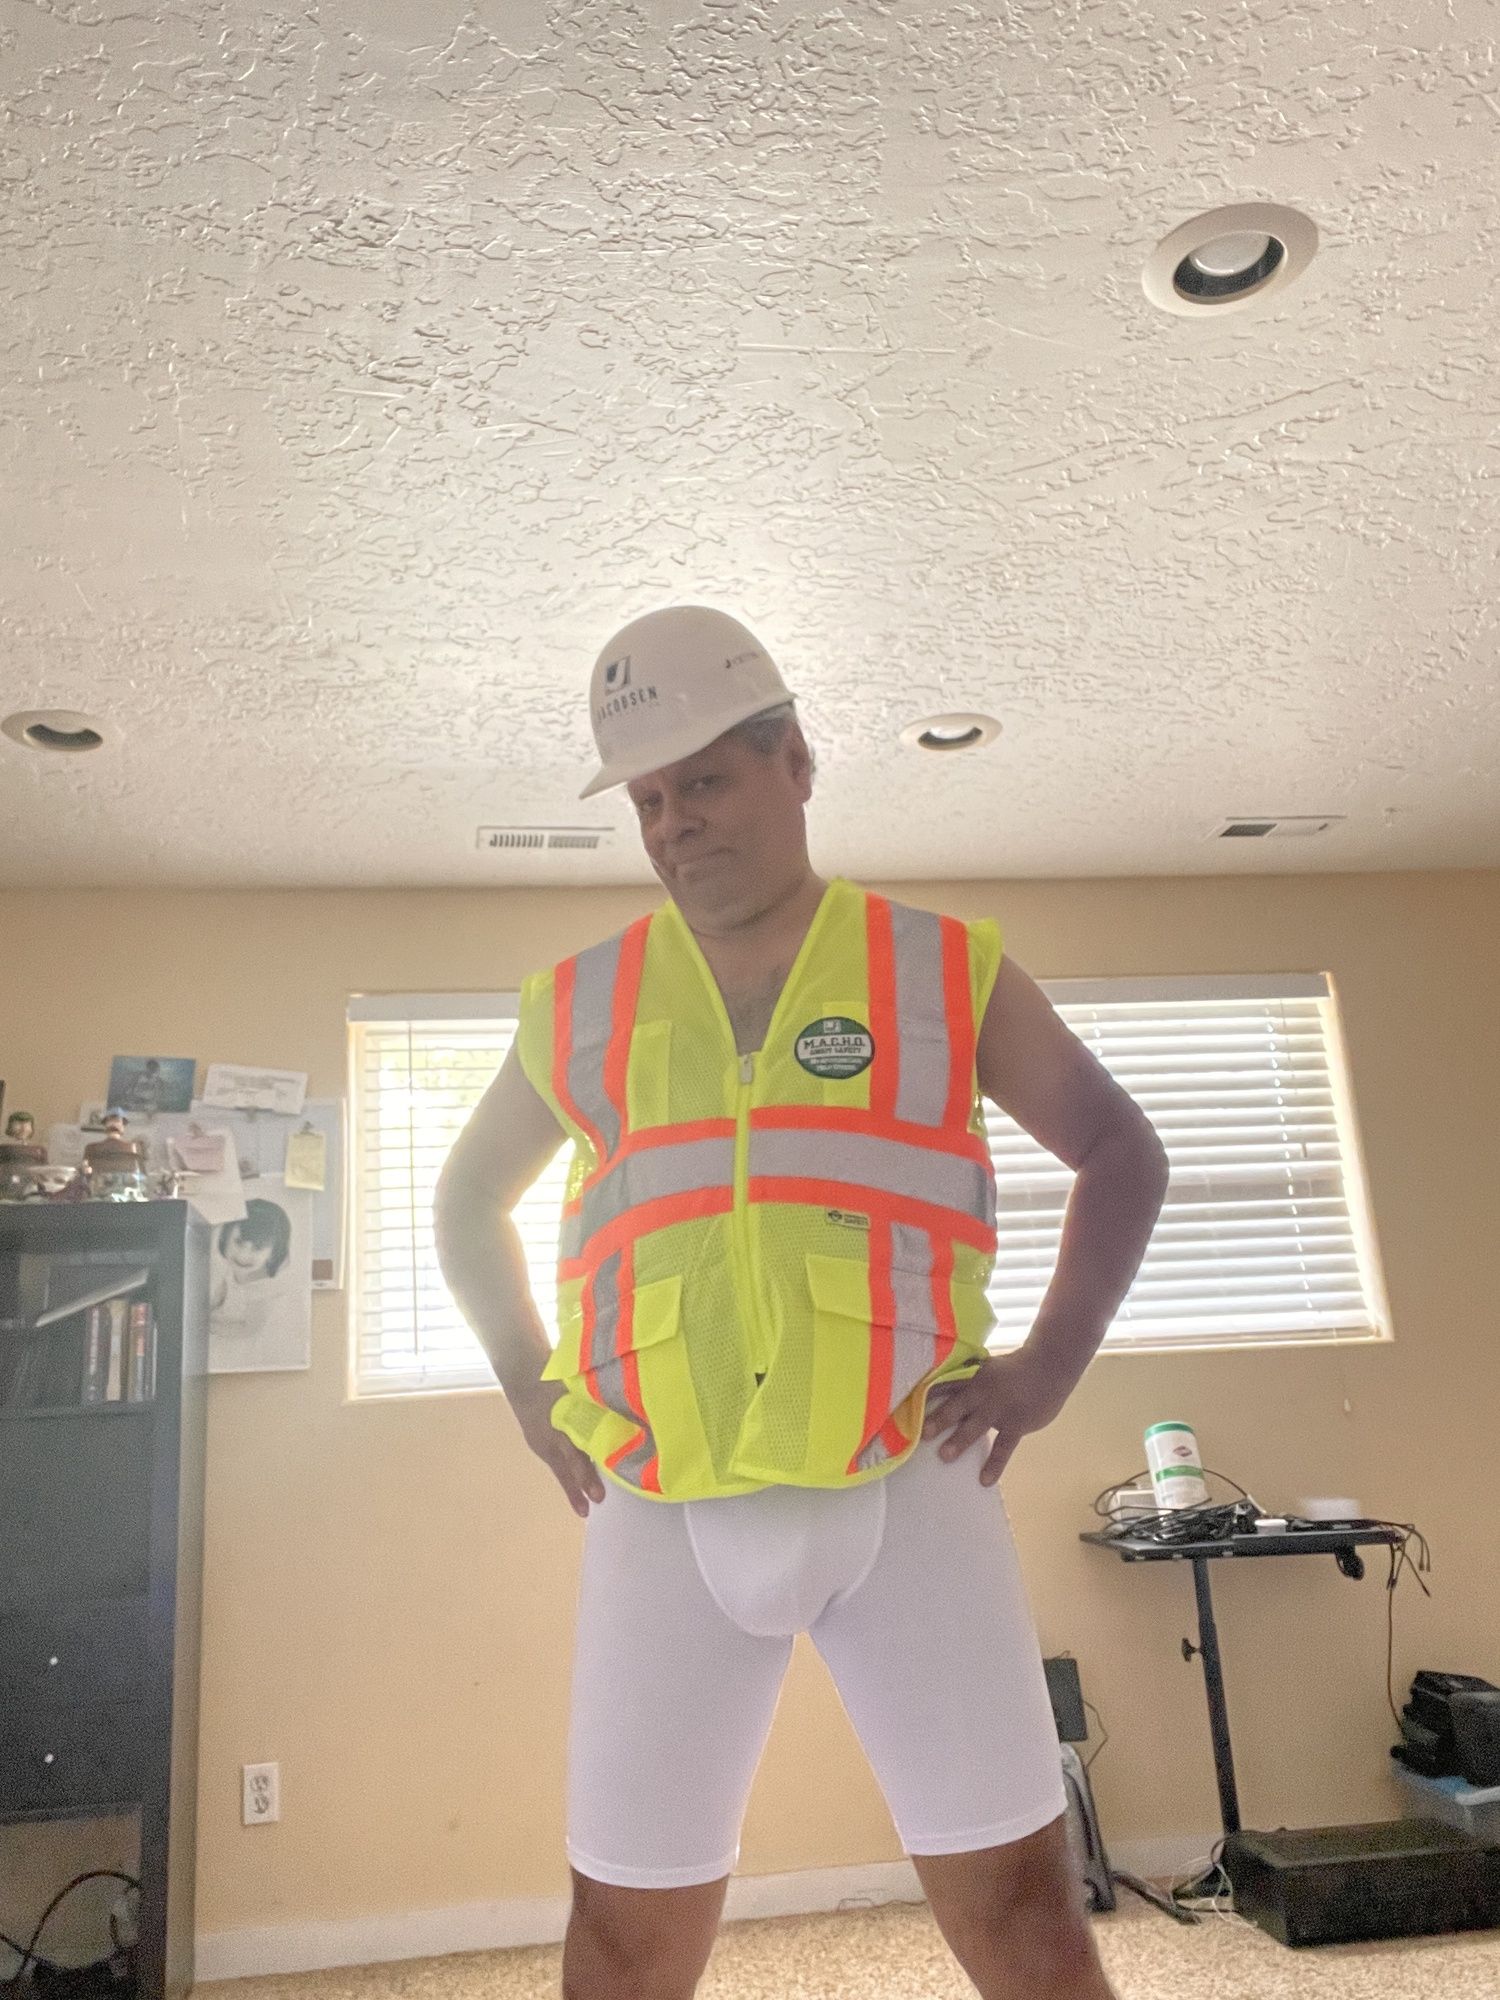 The Hard Construction Worker #11